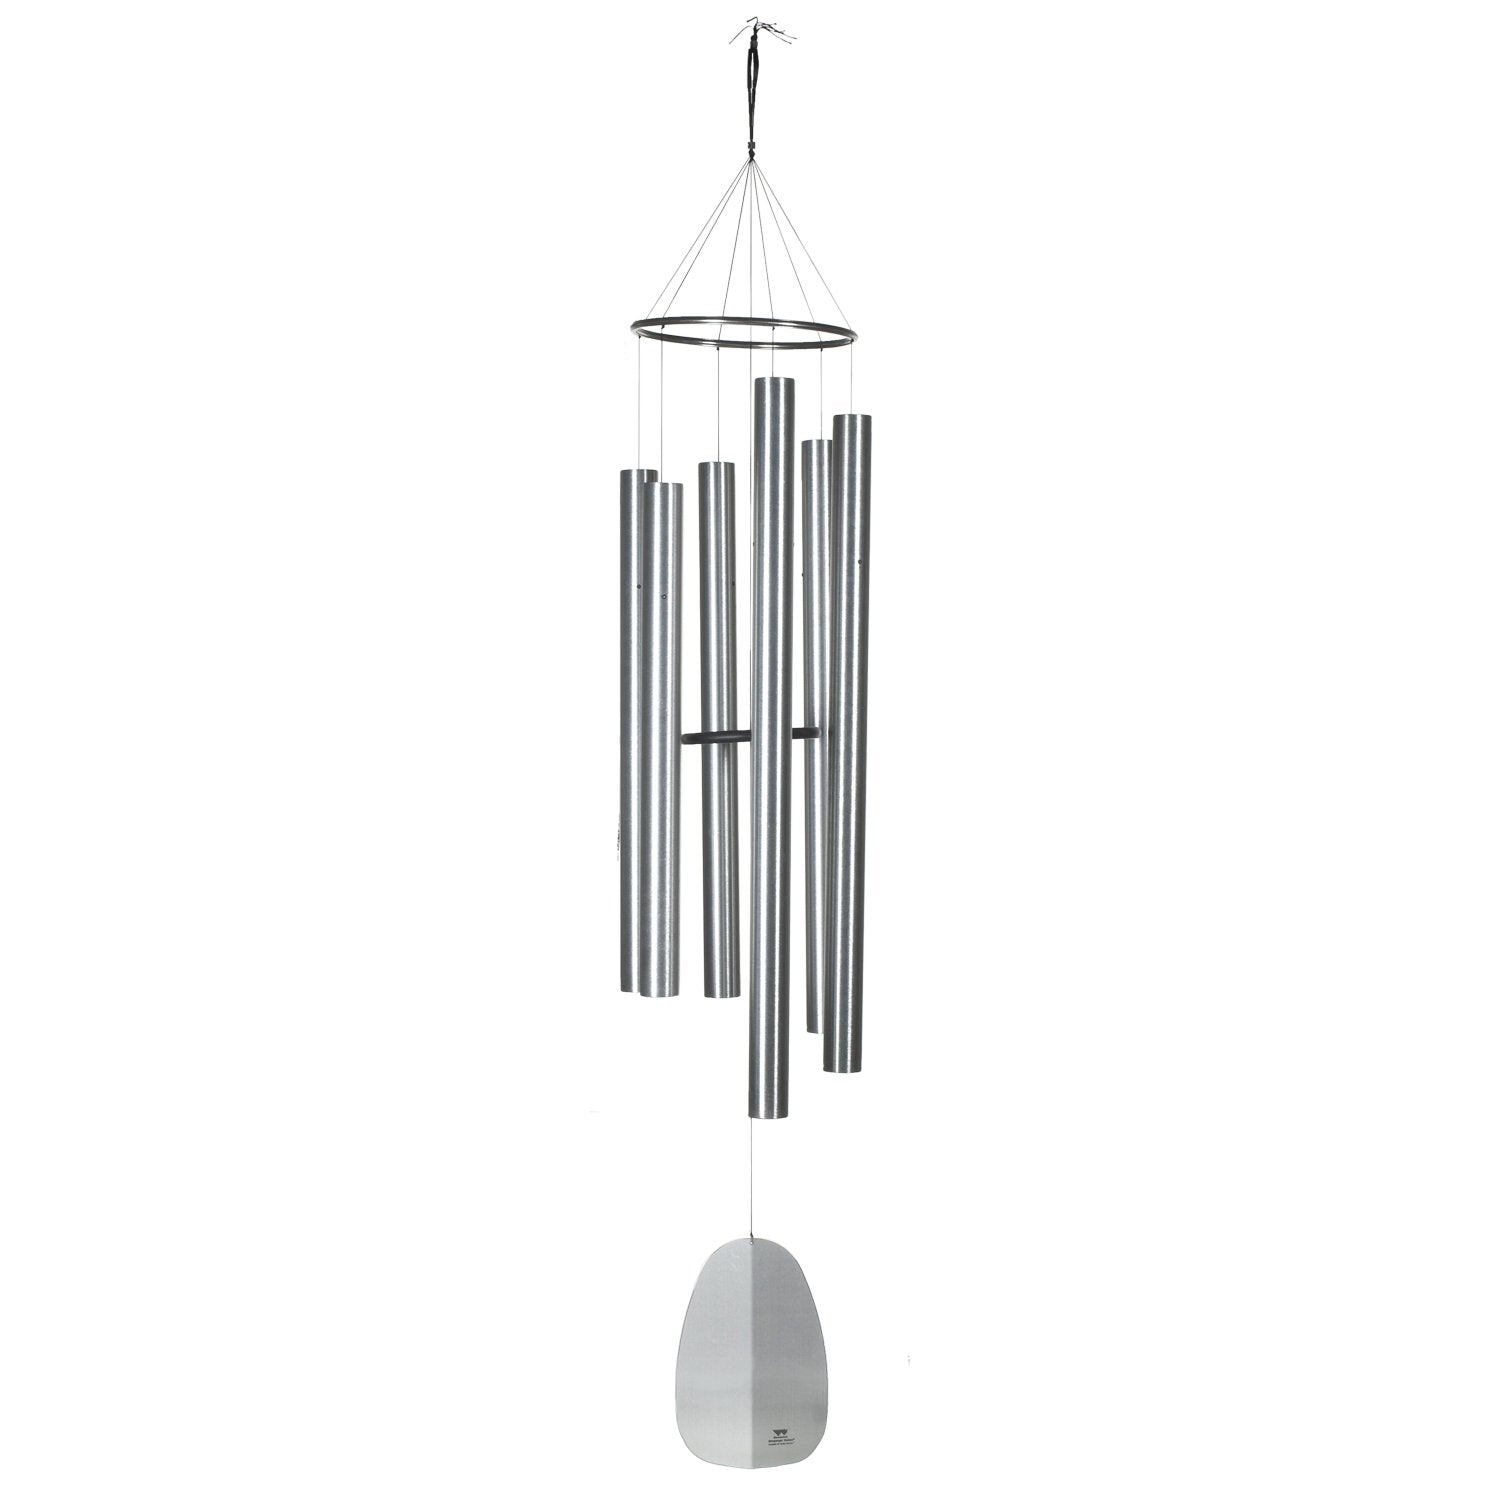 Windsinger Chimes of King David - Silver full product image